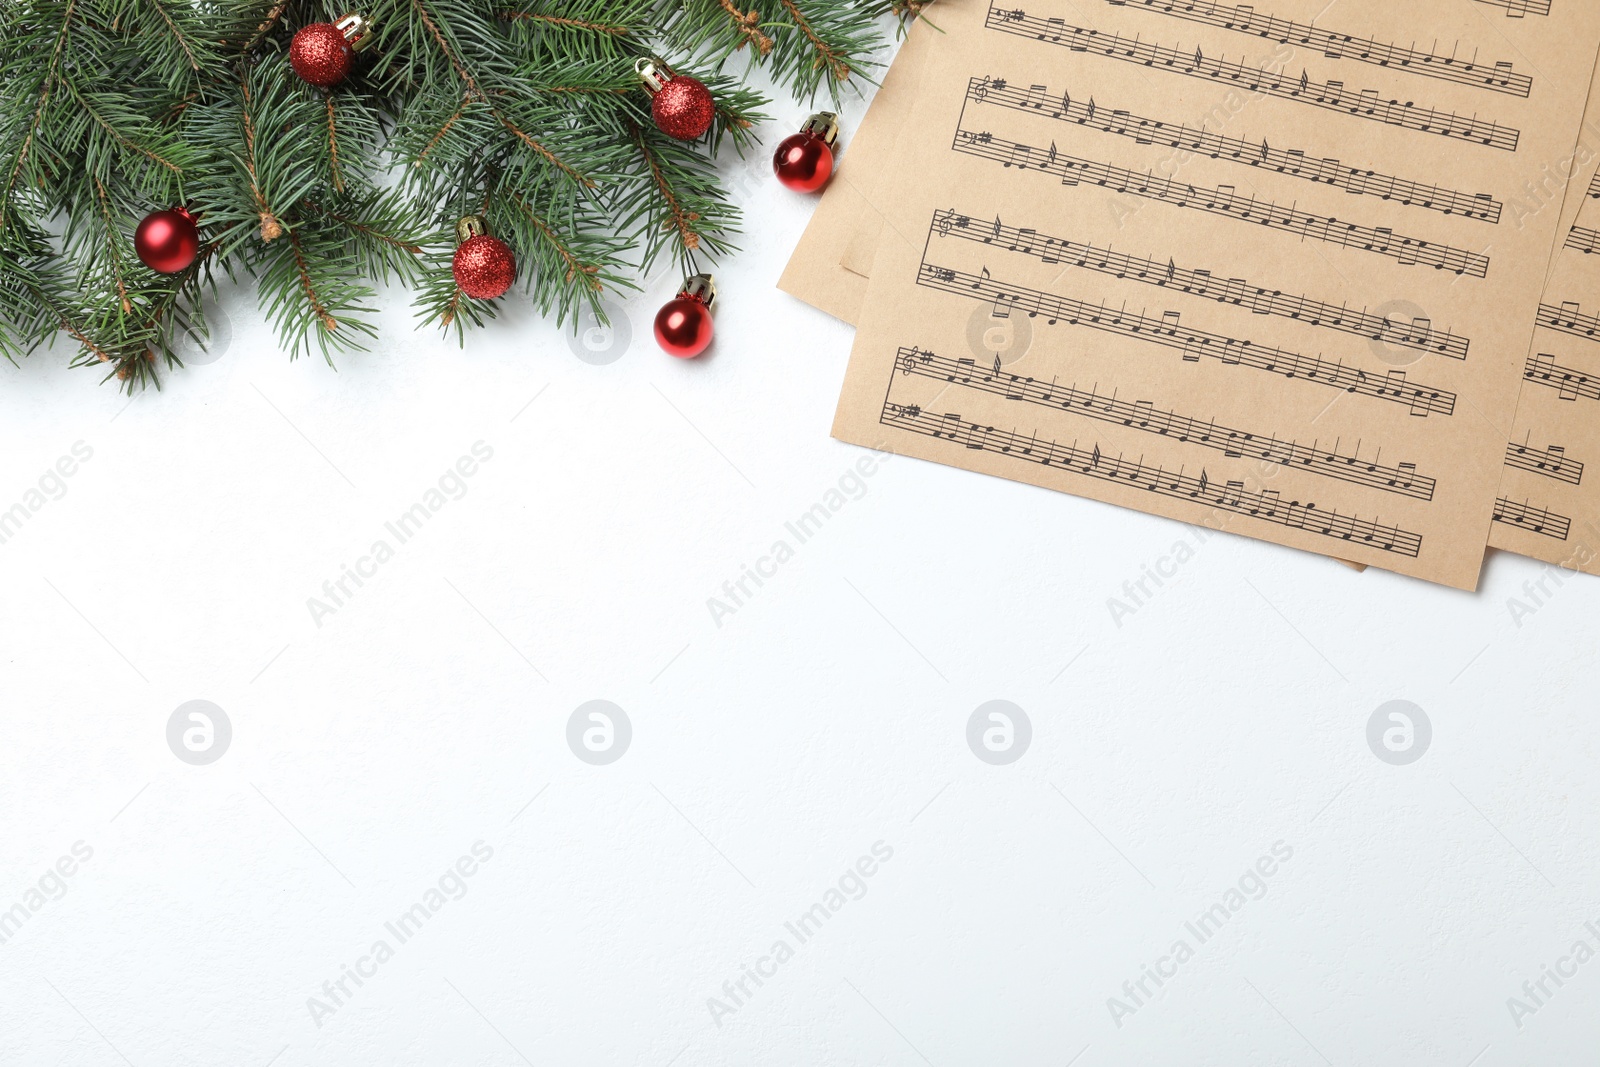 Photo of Music sheets near fir tree branches with Christmas balls and space for text on white background, flat lay